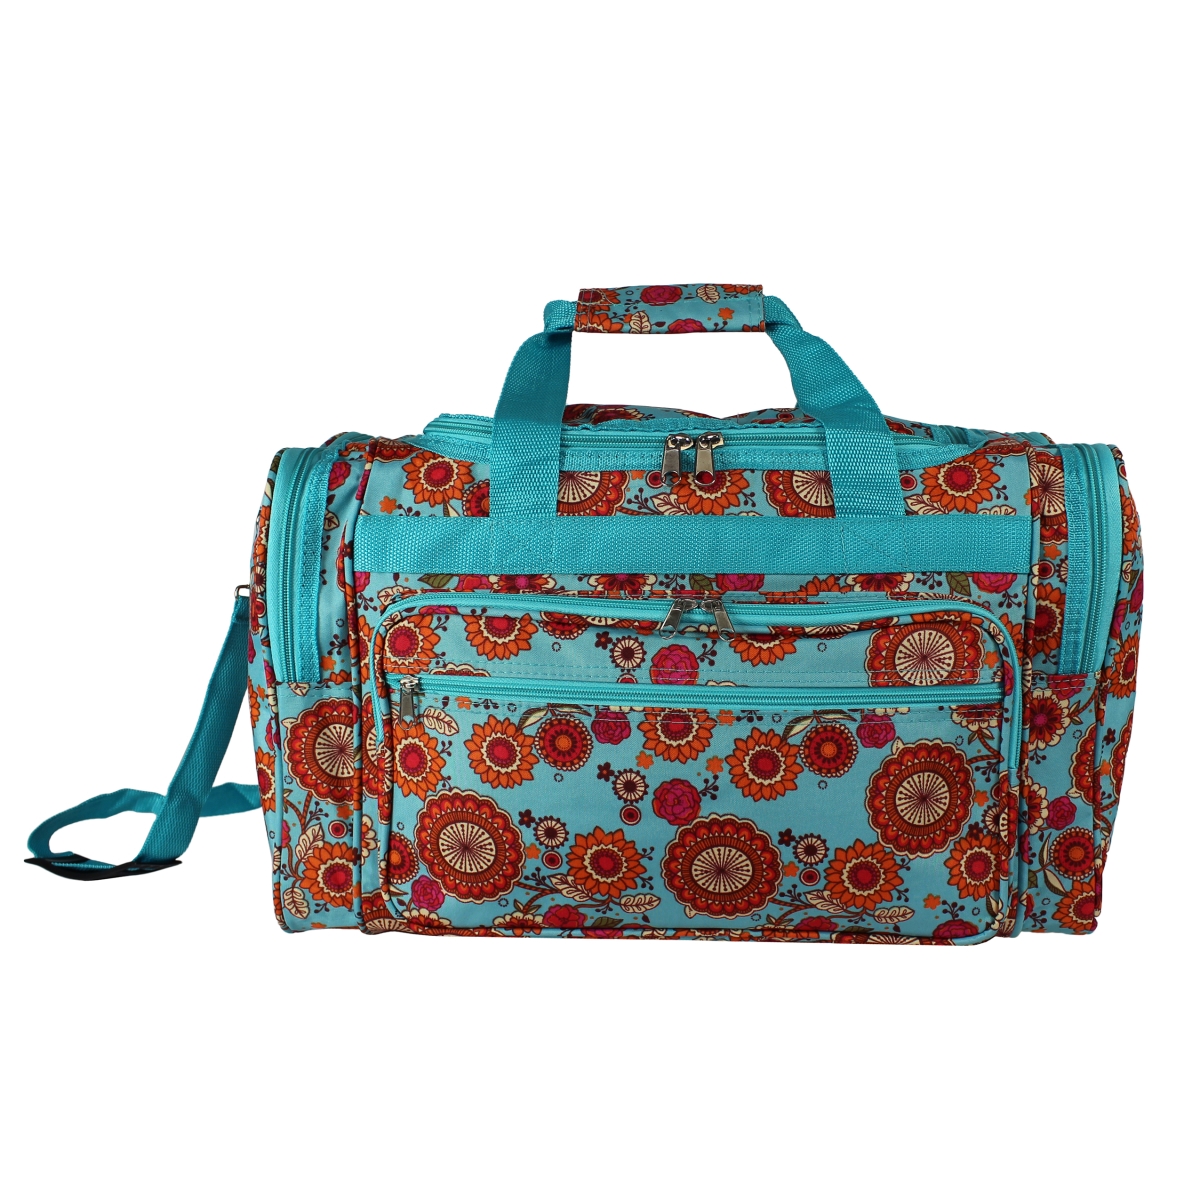 81t22-231 22 In. Carry-on Duffel Bag - Wildflowers